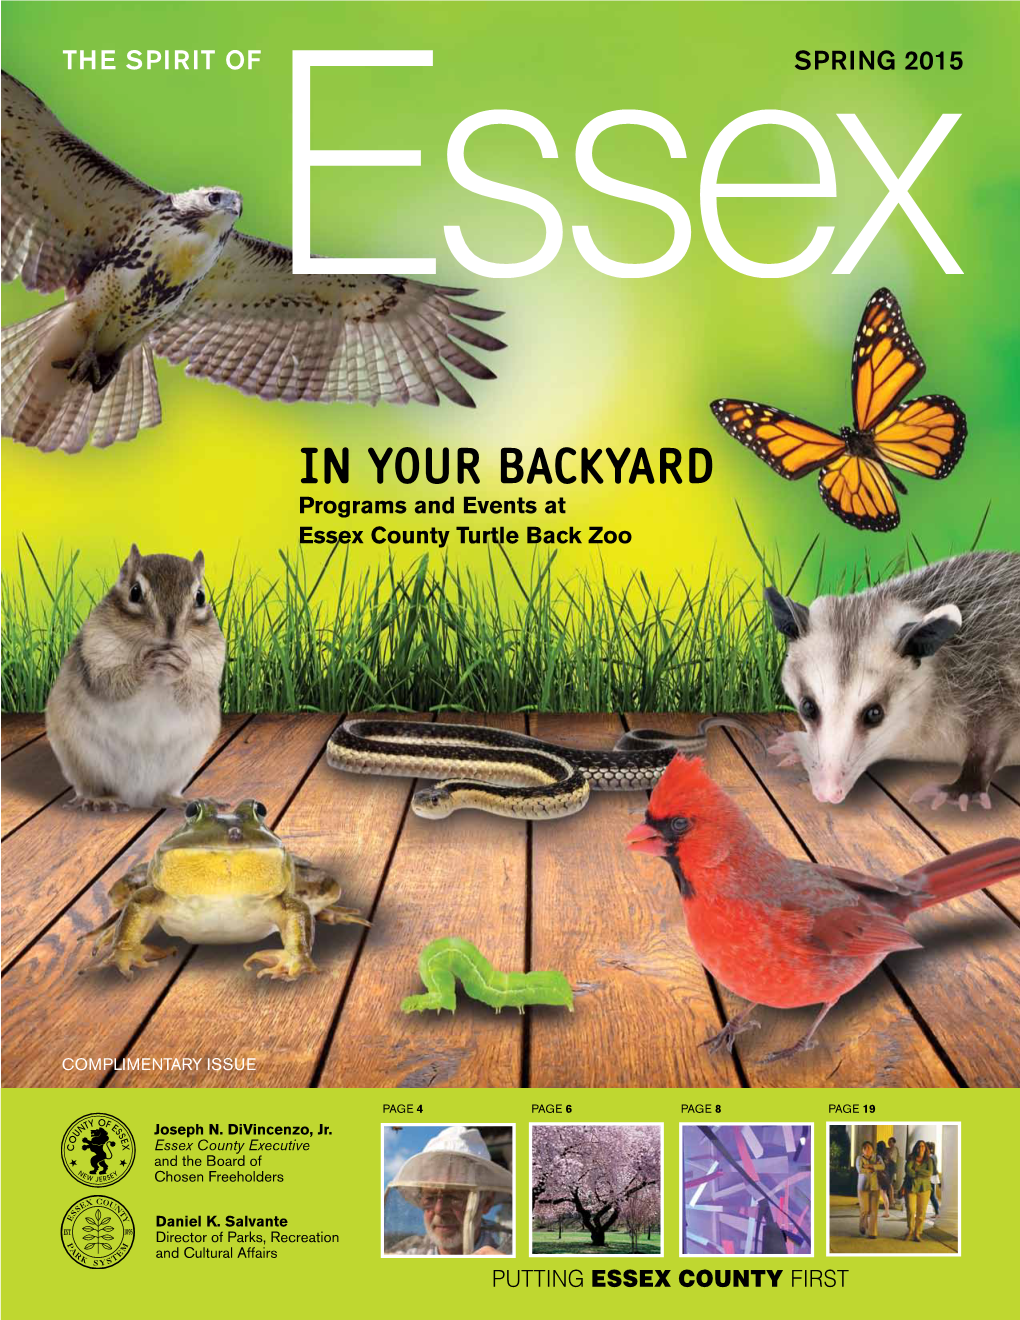 IN YOUR BACKYARD Programs and Events at Essex County Turtle Back Zoo